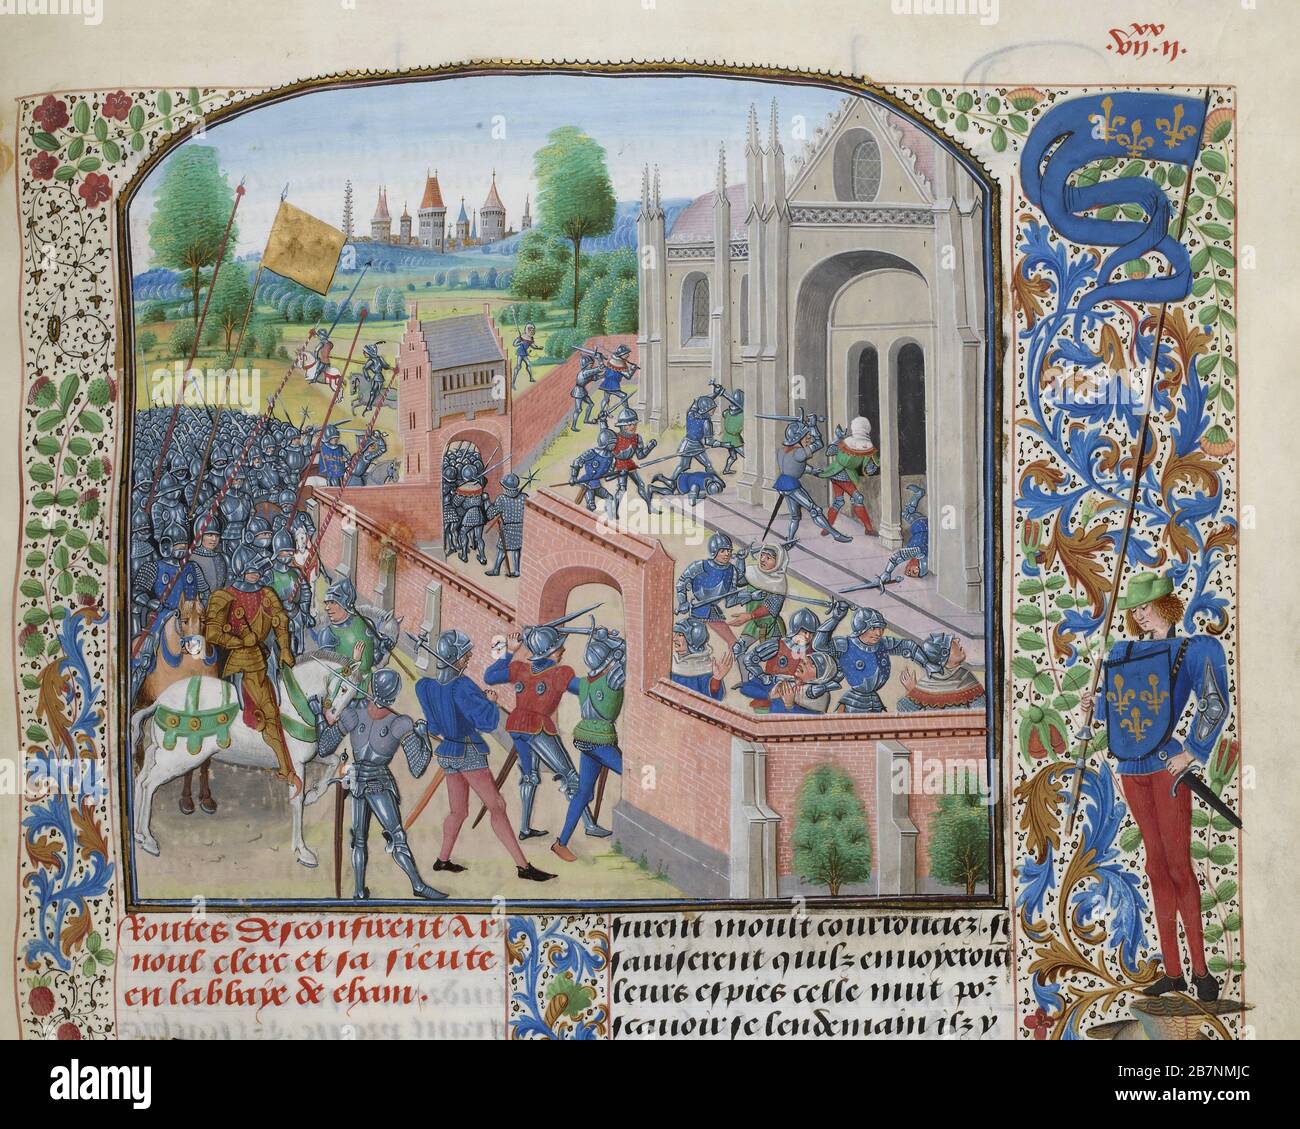 Taking of the Ename Abbey, 1381 (Miniature from the Grandes Chroniques de  France by Jean Froissart), ca 1470-1475. Found in the Collection of  Biblioth&#xe8;que Nationale de France Stock Photo - Alamy